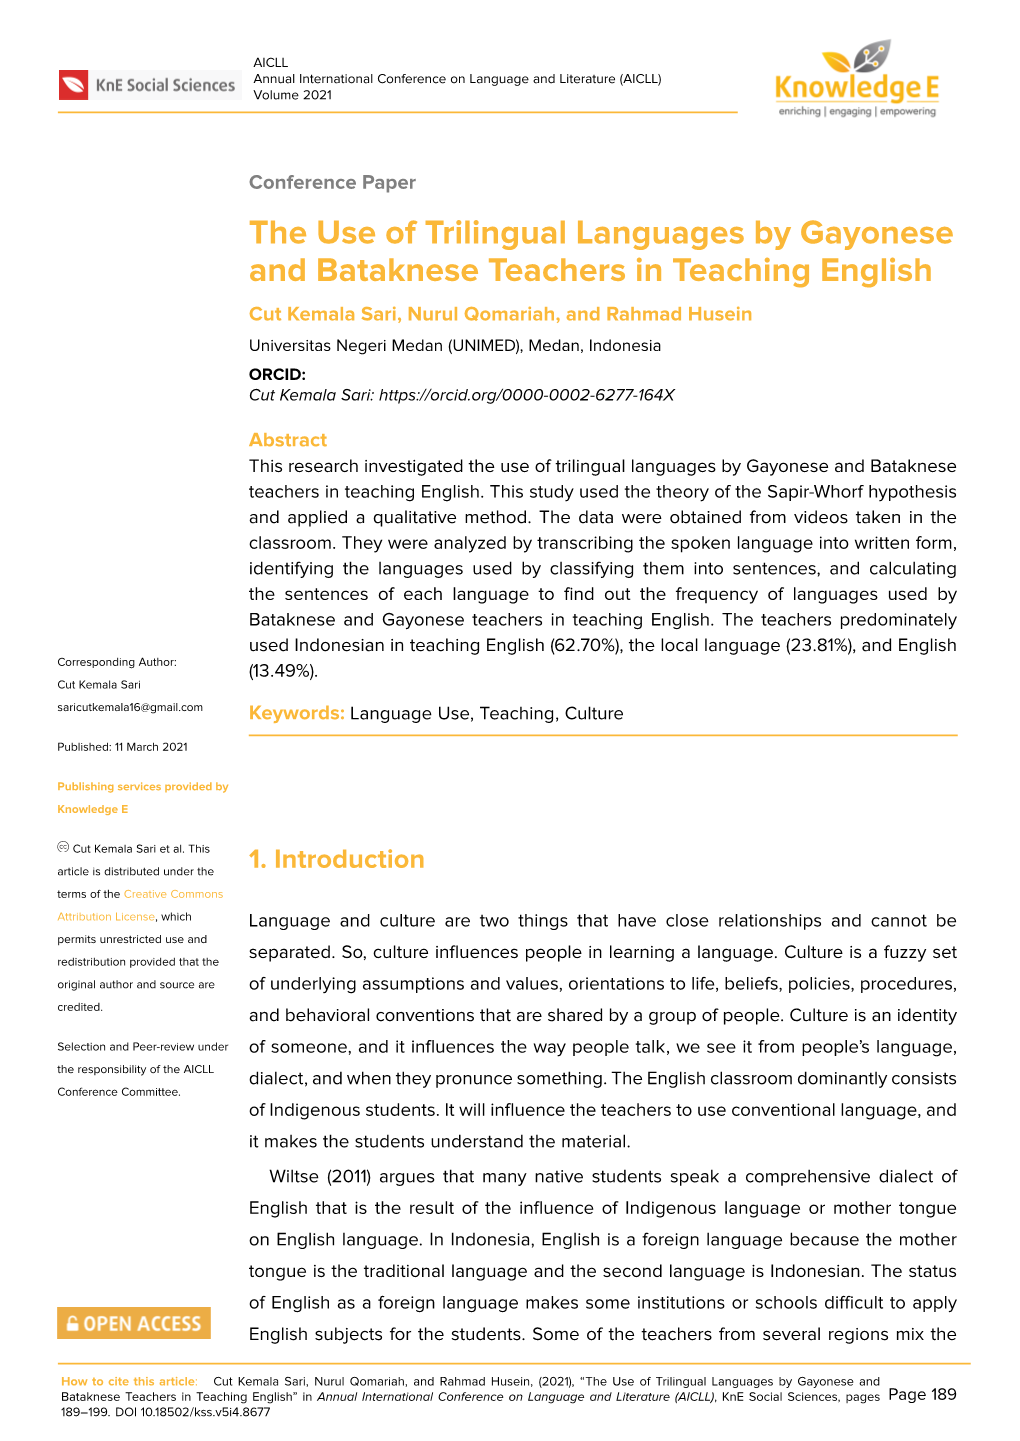 The Use of Trilingual Languages by Gayonese and Bataknese Teachers